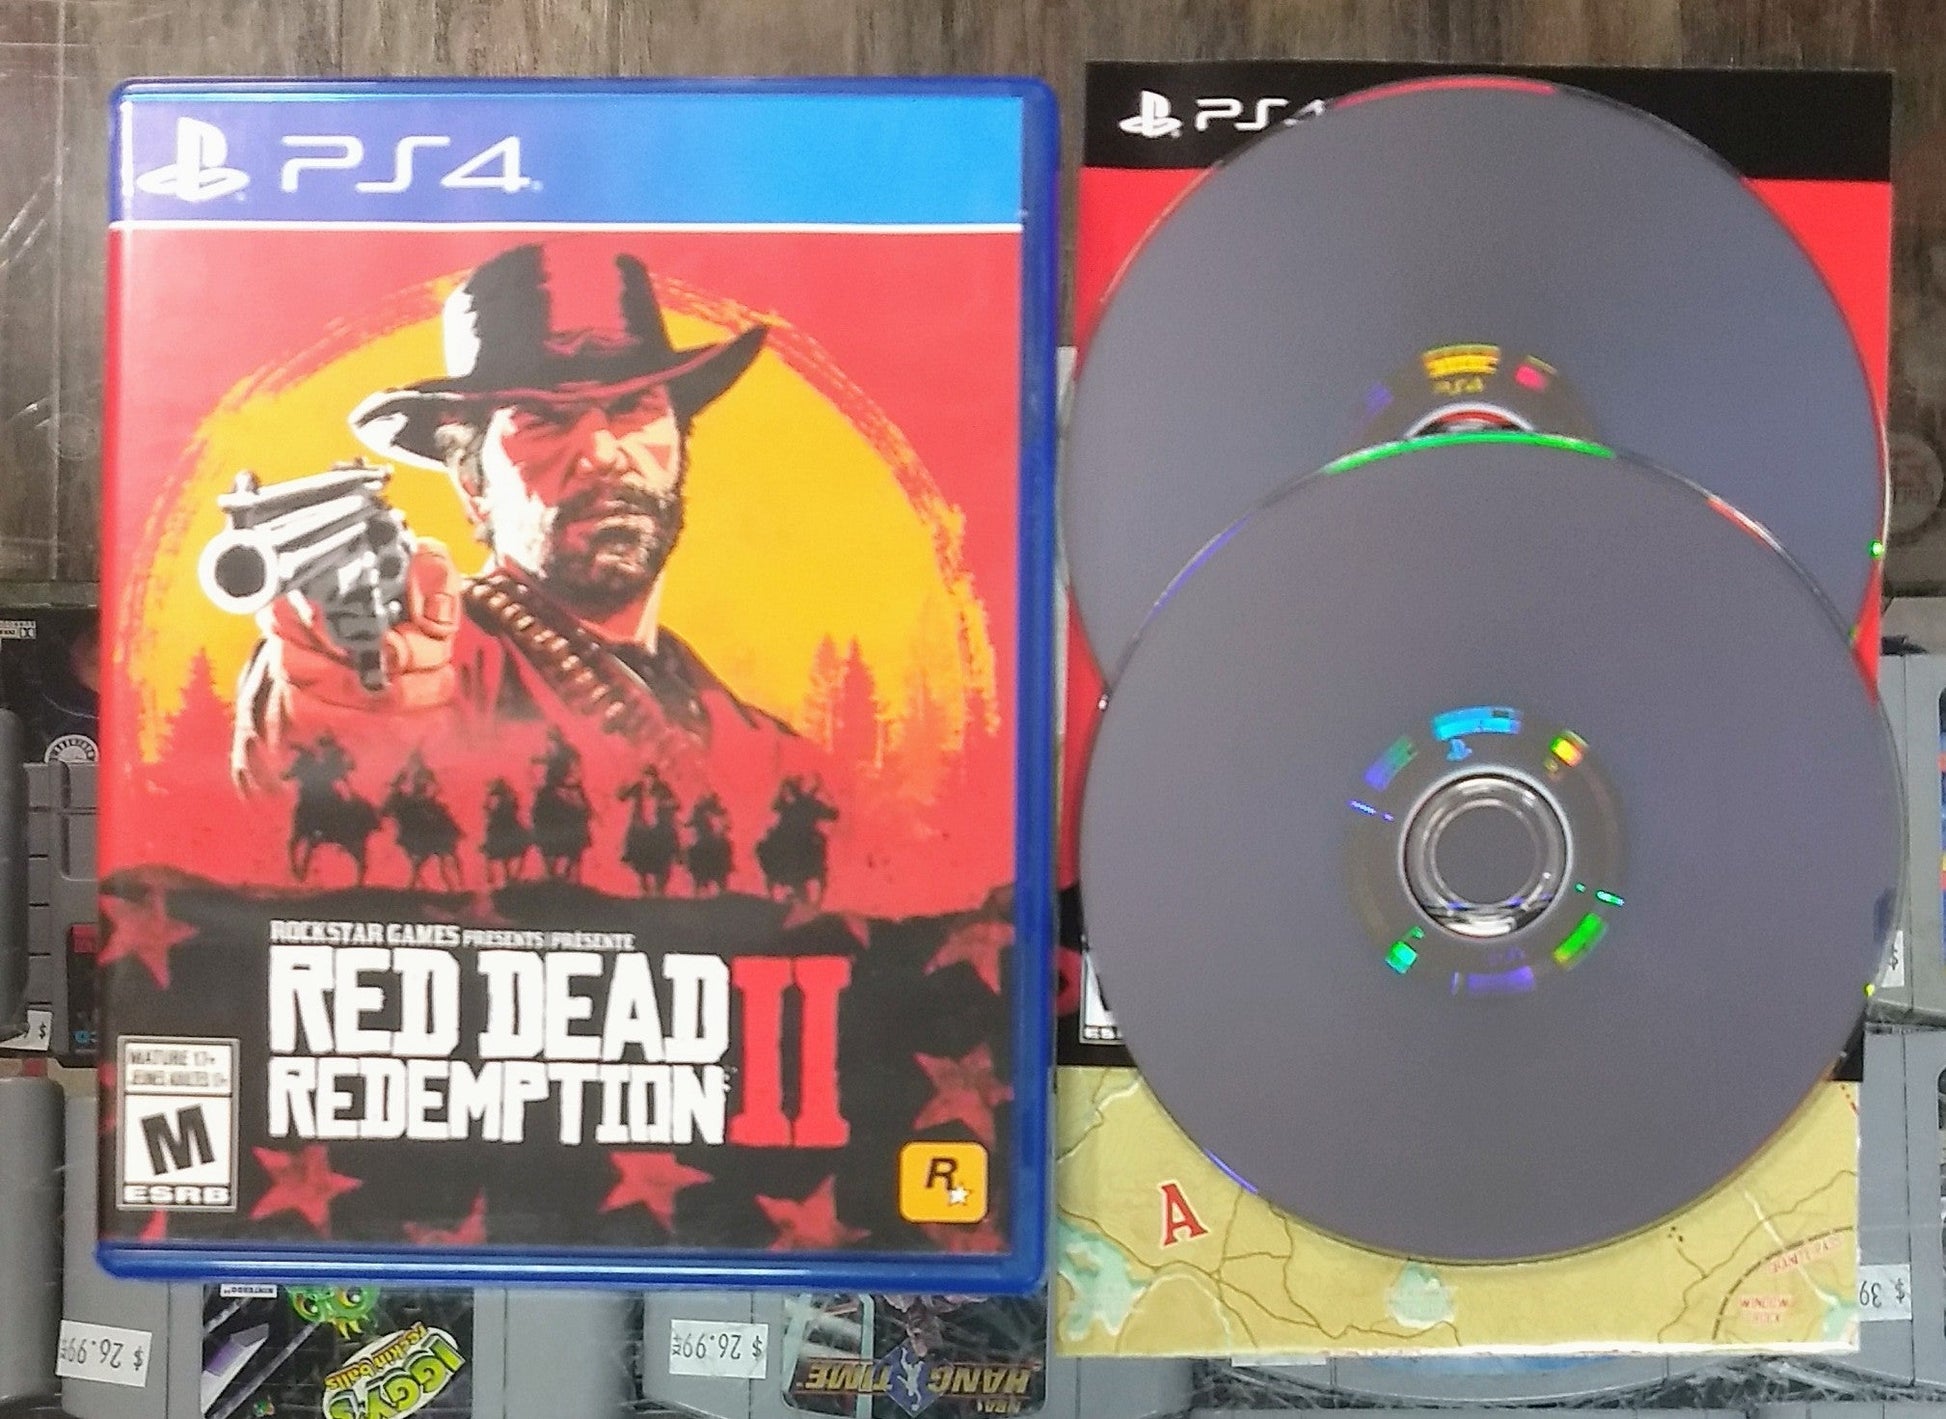 RED DEAD REDEMPTION II 2 (PLAYSTATION 4 PS4) - jeux video game-x